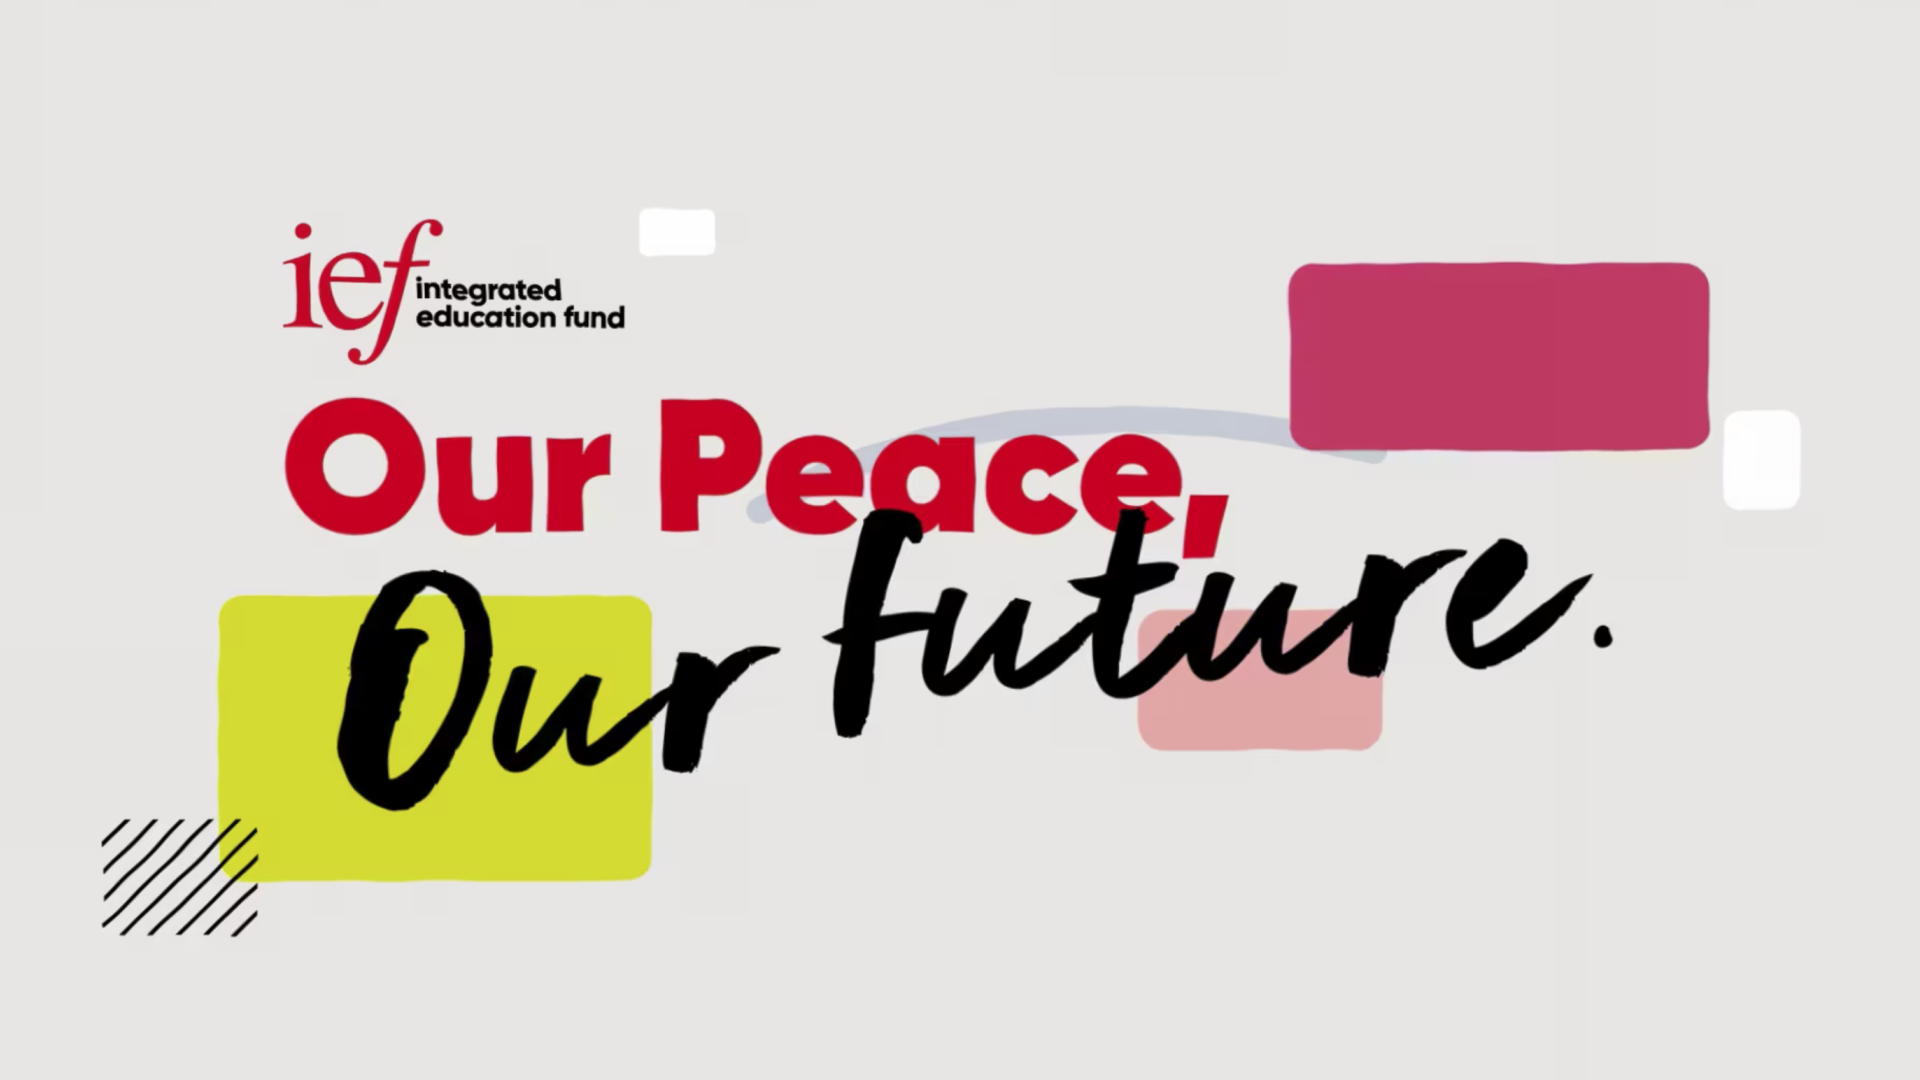 Public event to launch new "Our Peace, Our Future" short film